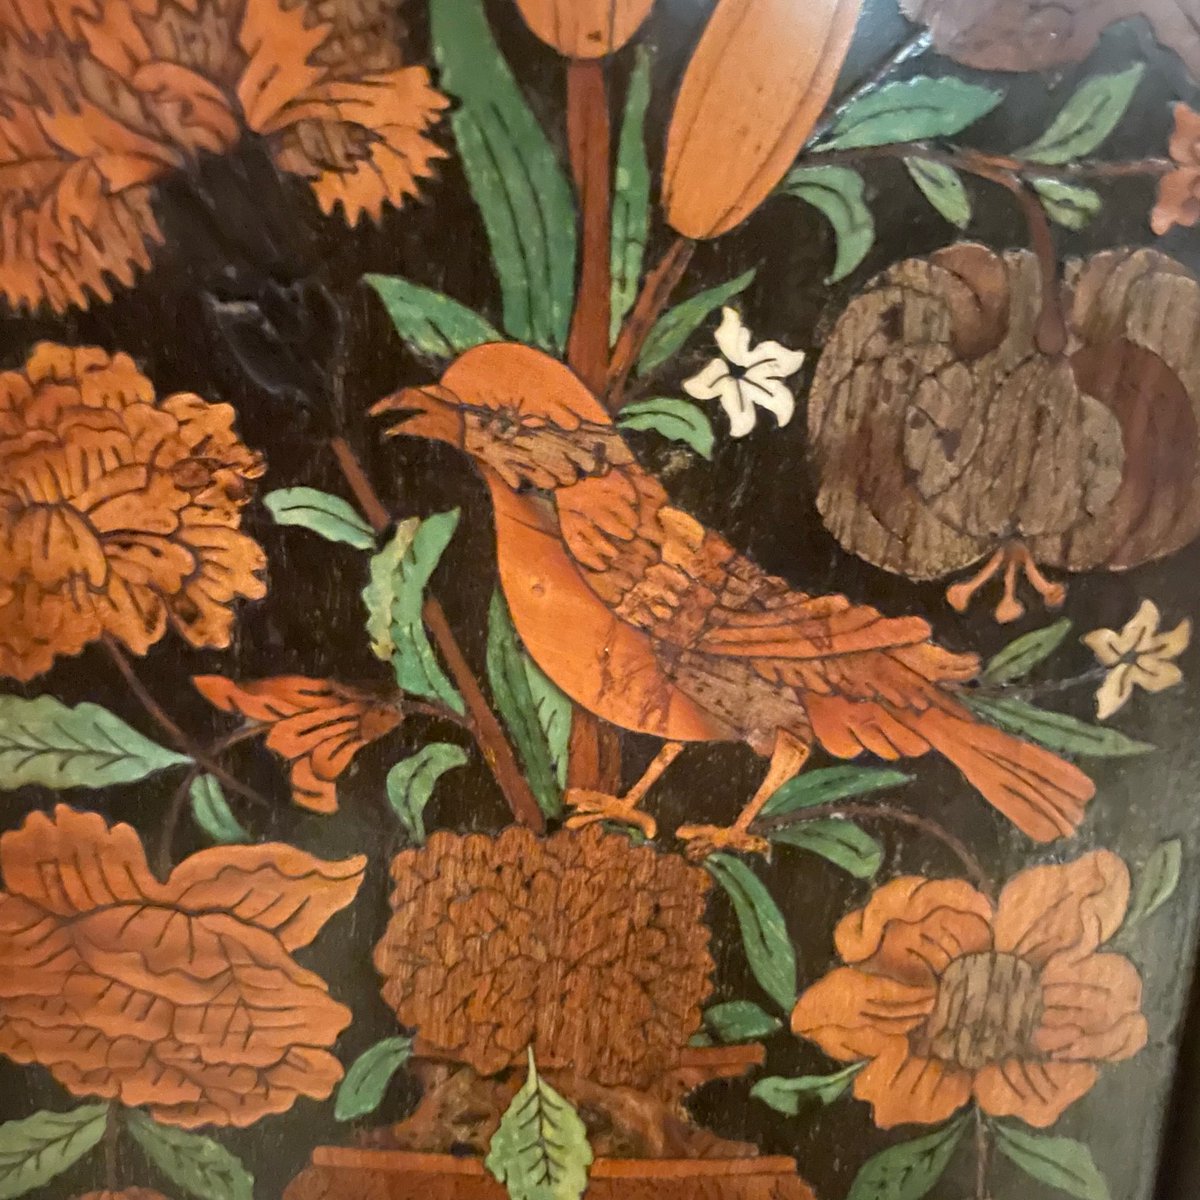 This #BlossomWeek we're encouraging you to celebrate the fleeting blossom wherever you are. Can you #guess what this blossom inspired #object is? Explore more #blossom inspired objects, #highlights in the #house this week. bit.ly/HouseBlossom